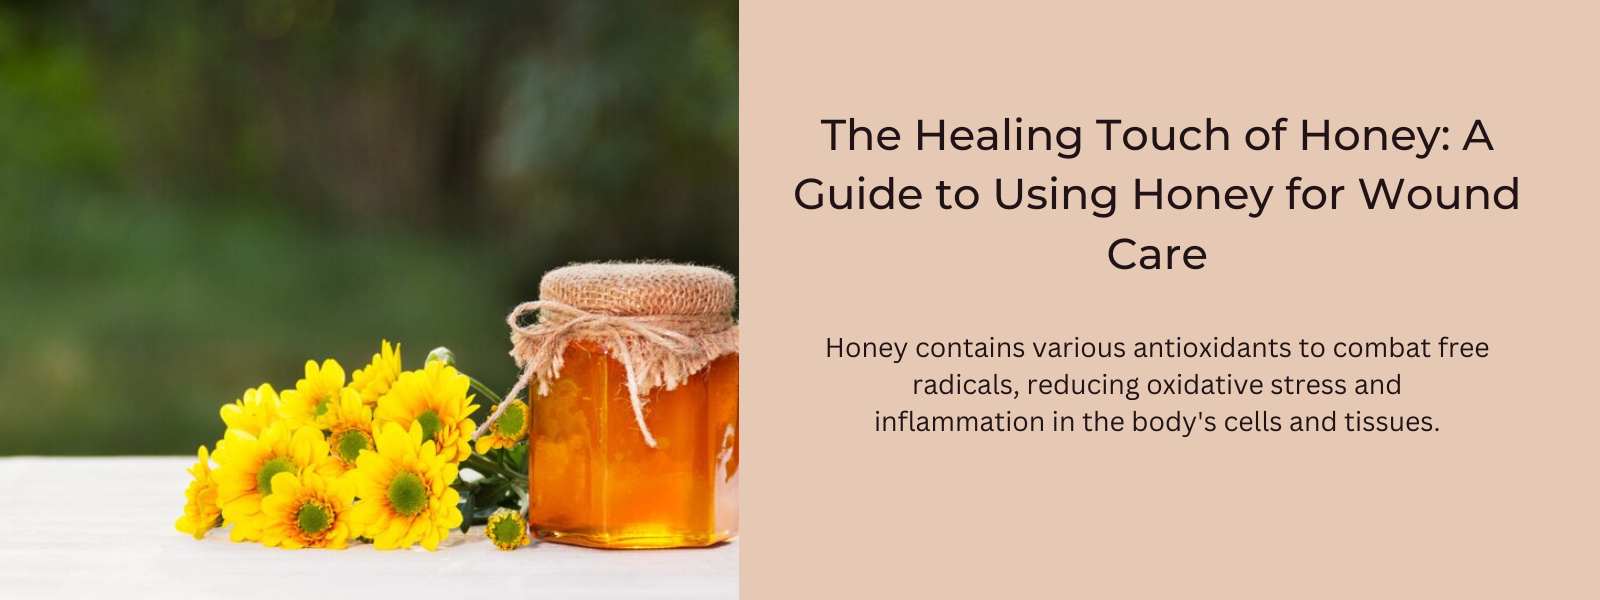 The Healing Touch of Honey: A Guide to Using Honey for Wound Care